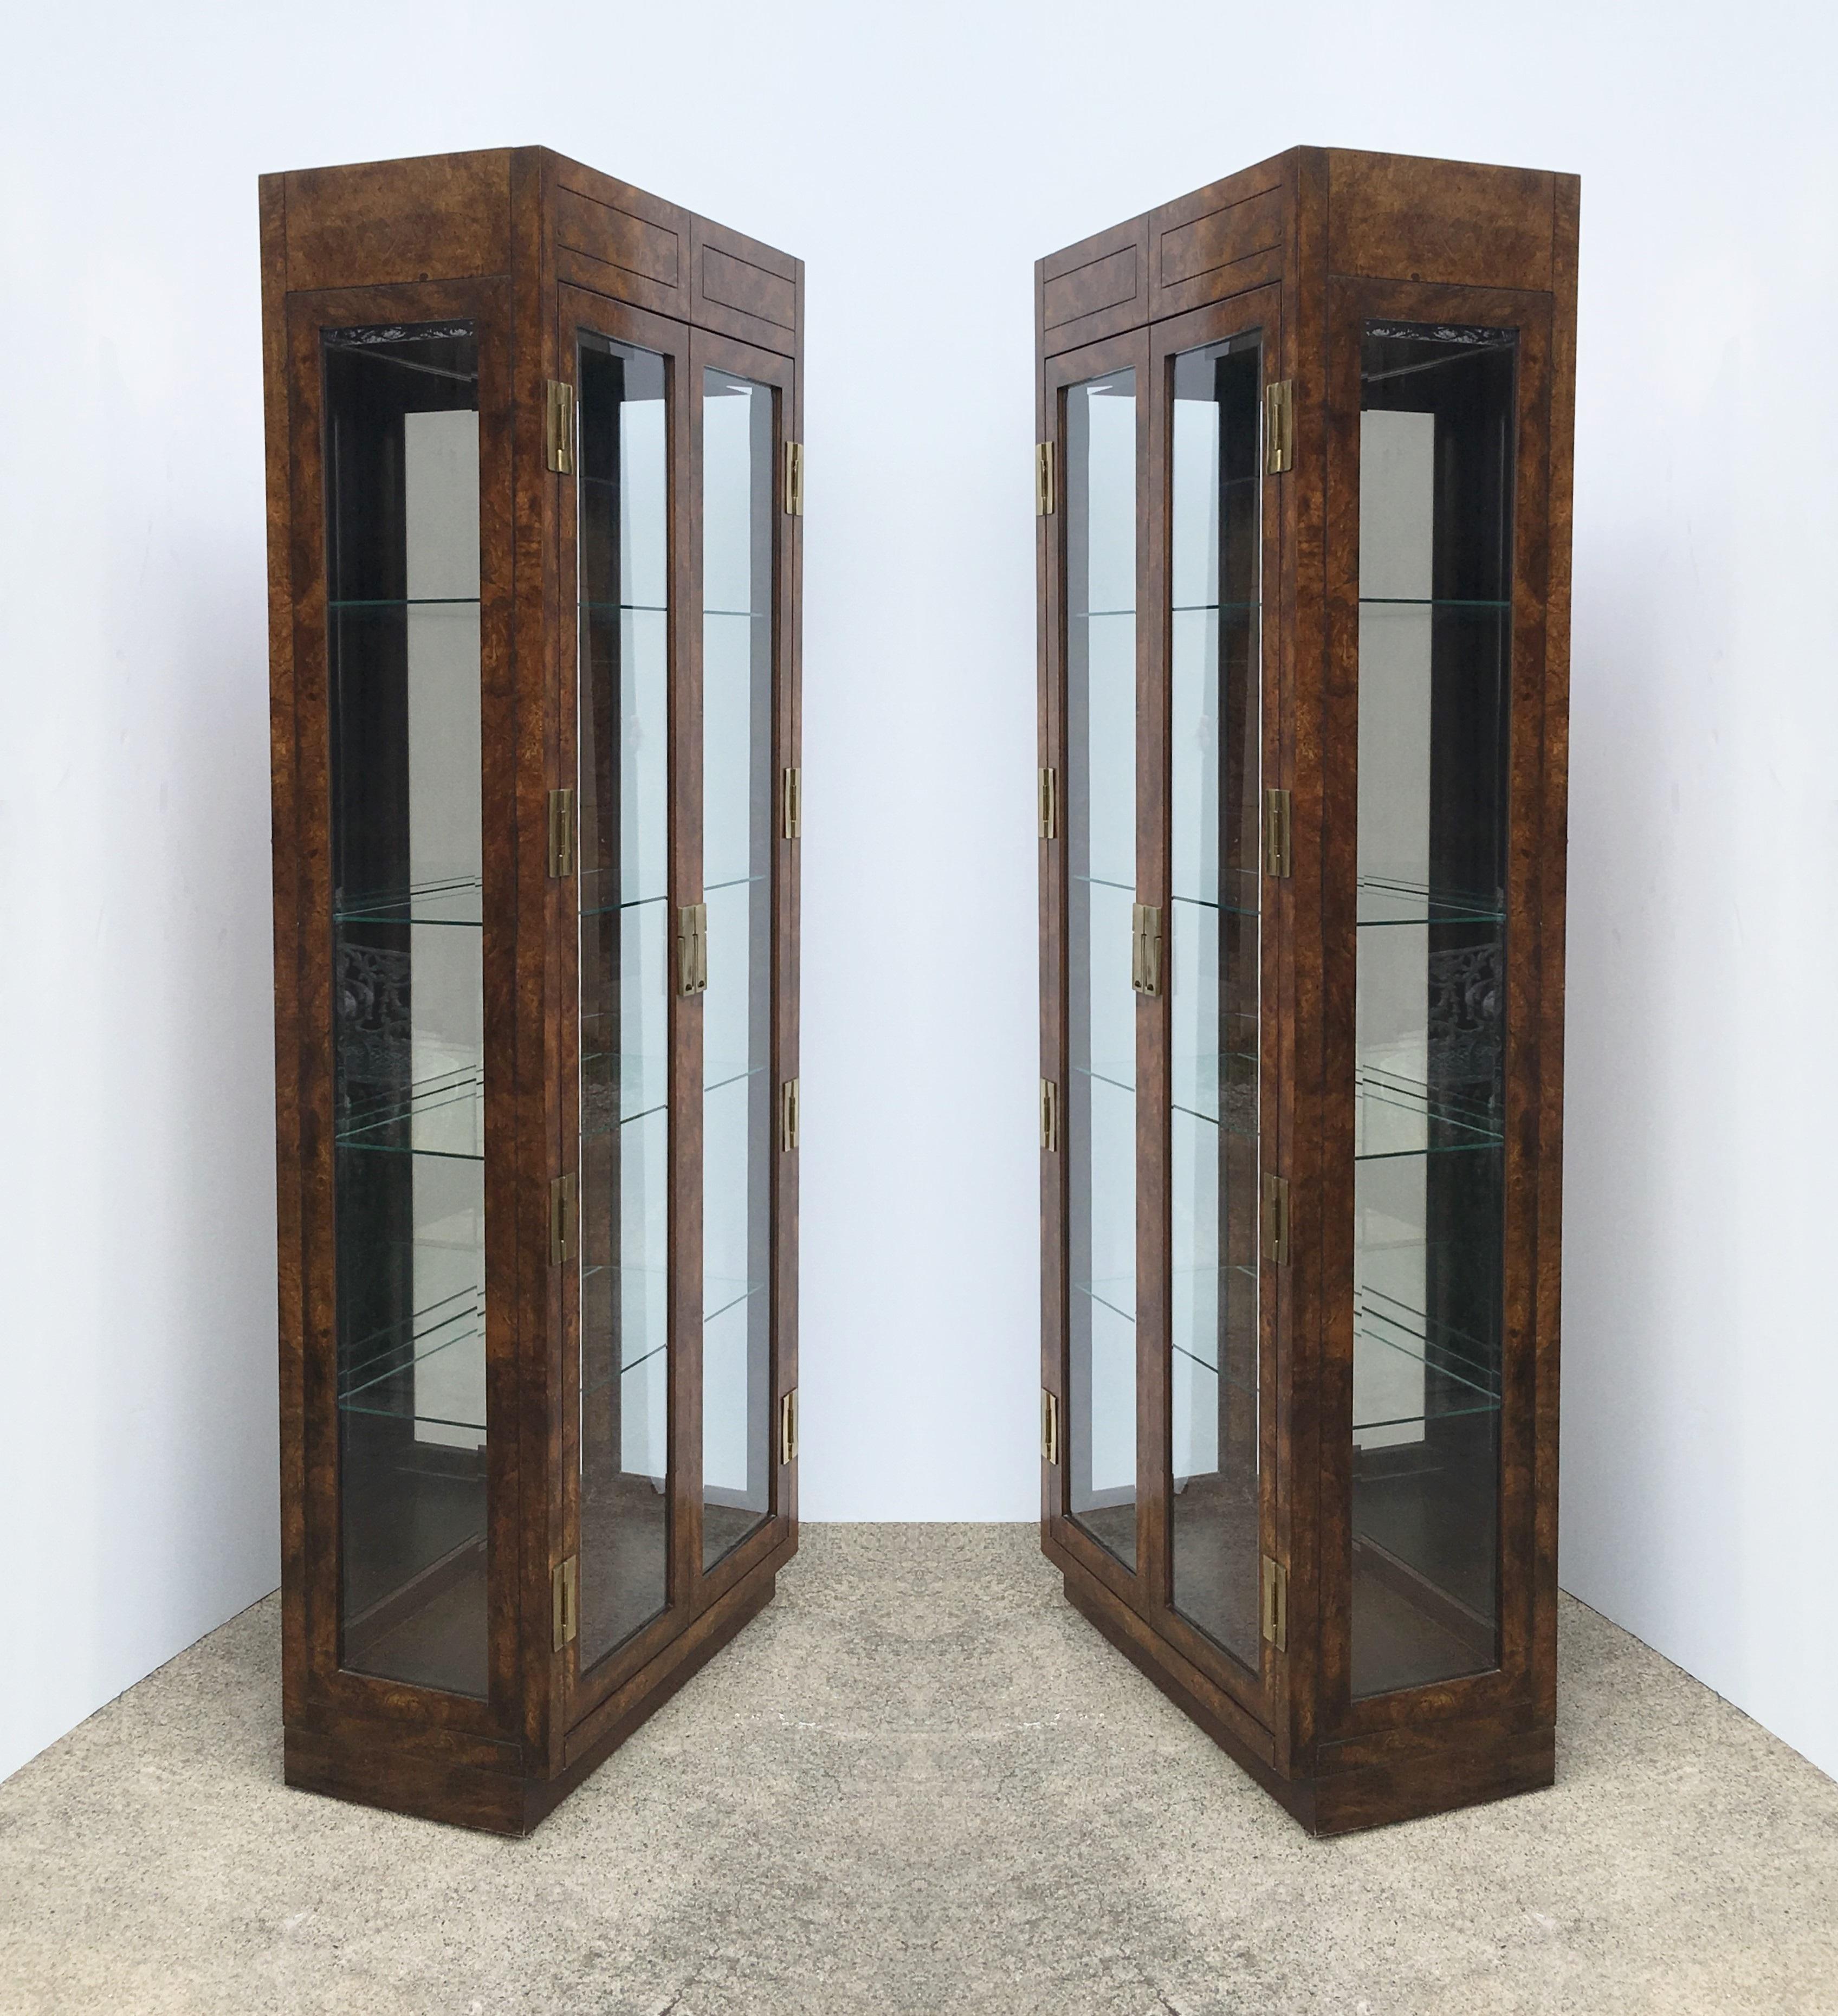 Pair of Campaign style display cabinets. The cabinets feature two beveled glass doors which open to an interior with a mirrored back. There are four thick glass shelves in each and one interior light. Heavy brass hardware adorns the front. Can be